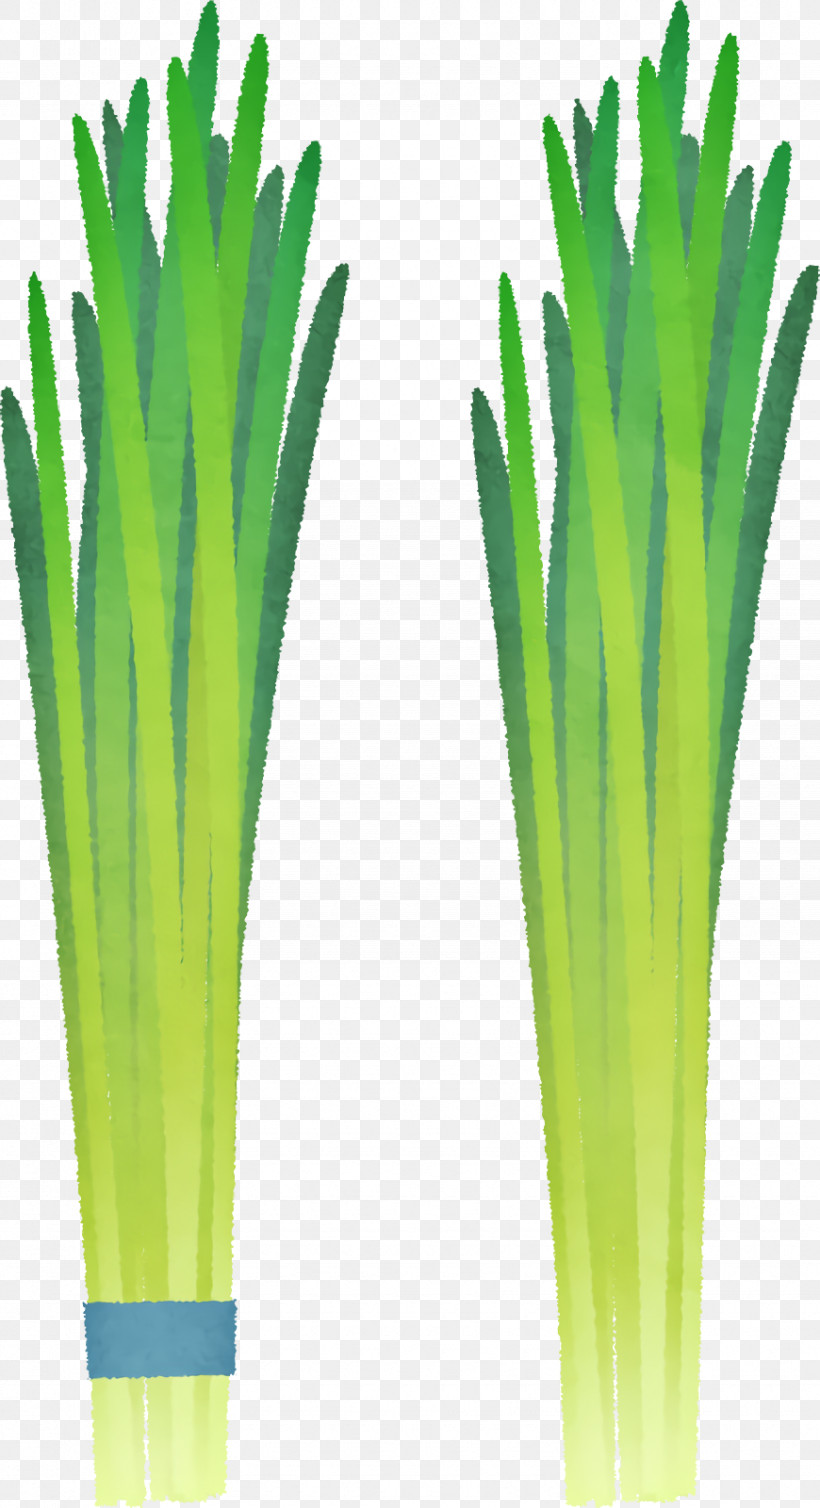 Welsh Onion Commodity Herb Onions, PNG, 870x1600px, Welsh Onion, Commodity, Herb, Onions Download Free